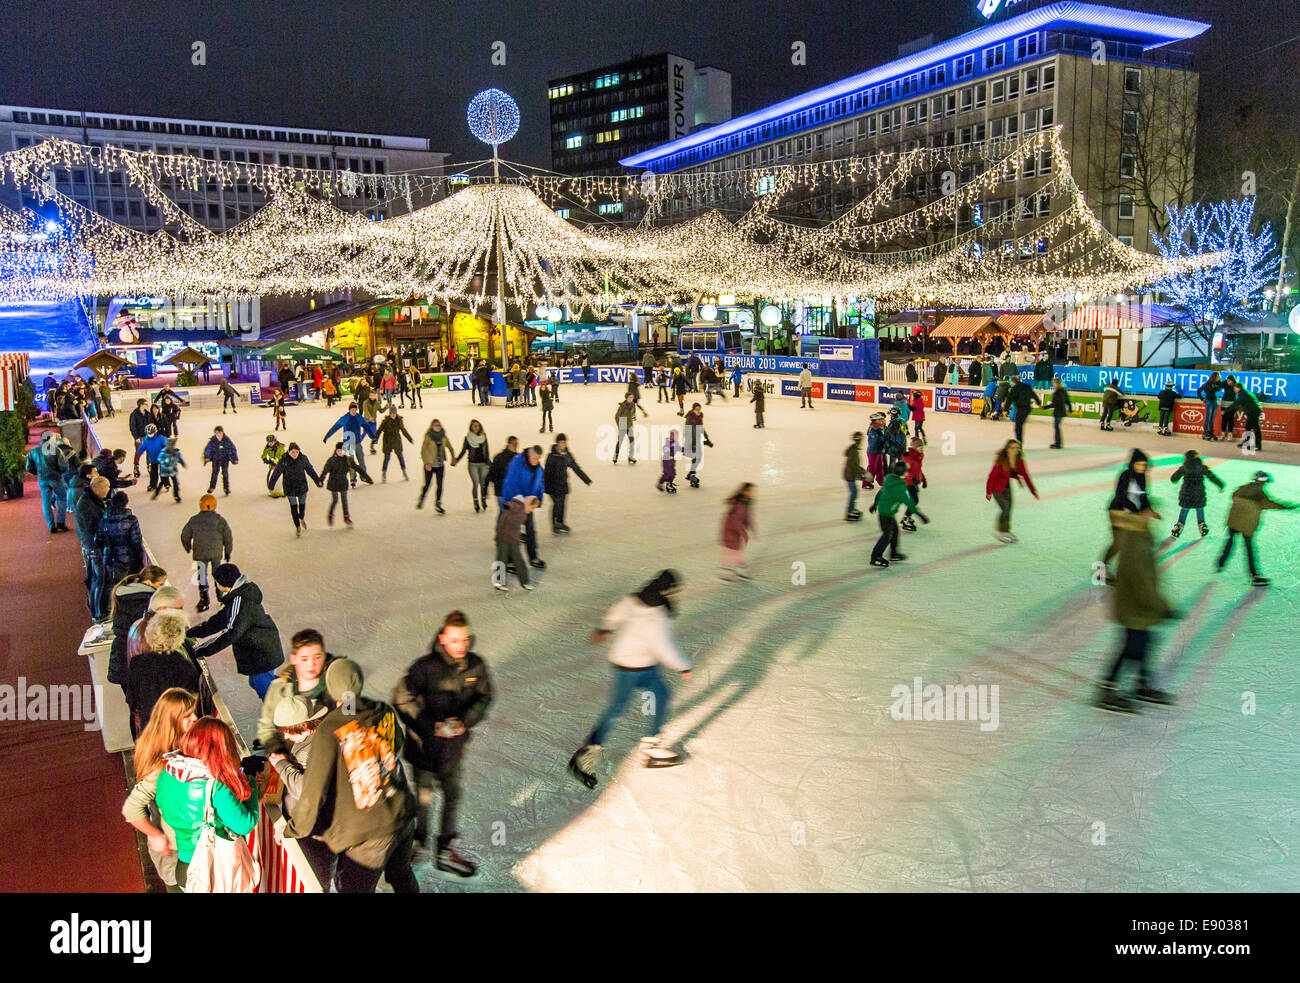 Dining on Ice, open air ice rink in the city center, Kennedy square, Essen, Germany Stock Photo